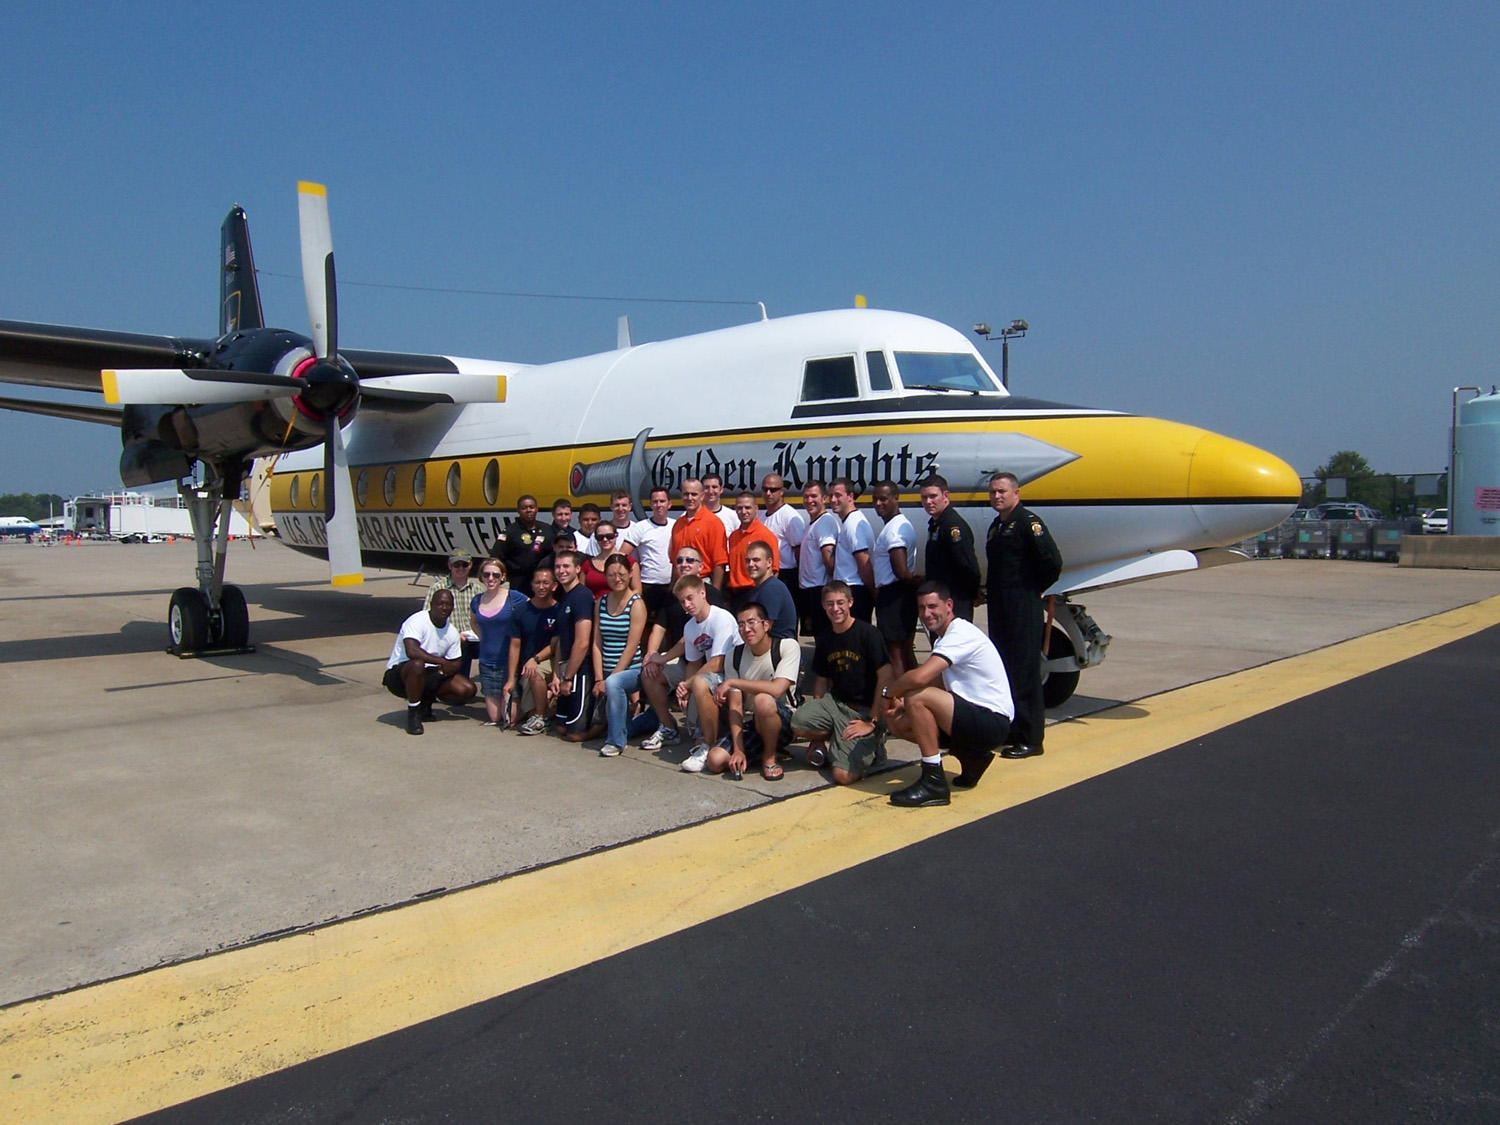 the Golden Knights pose with UVA students